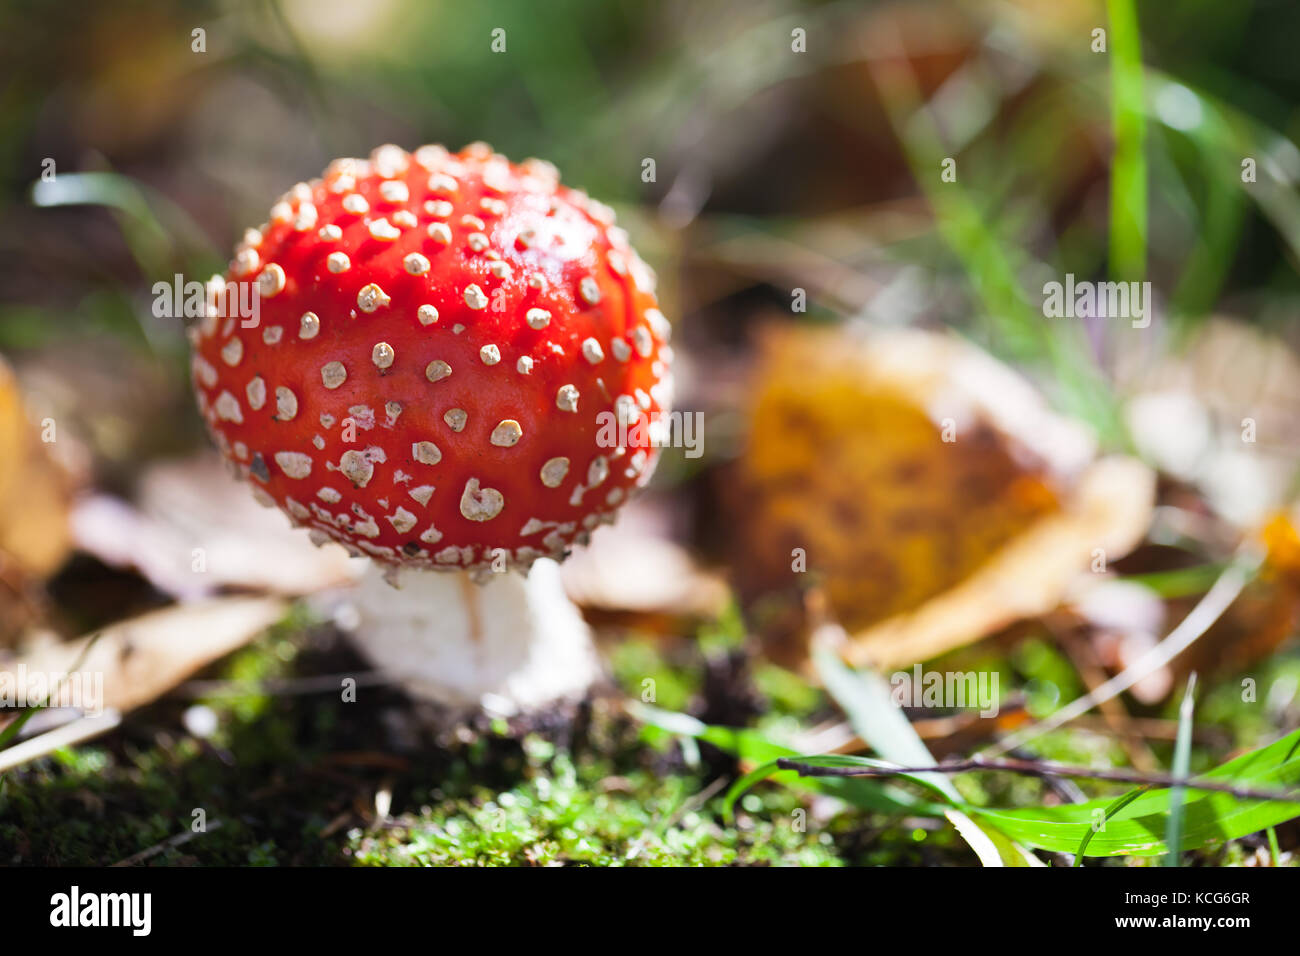 Poisonous mushroom Amanita muscaria, commonly known as the fly agaric or fly amanita grows in summer forest Stock Photo